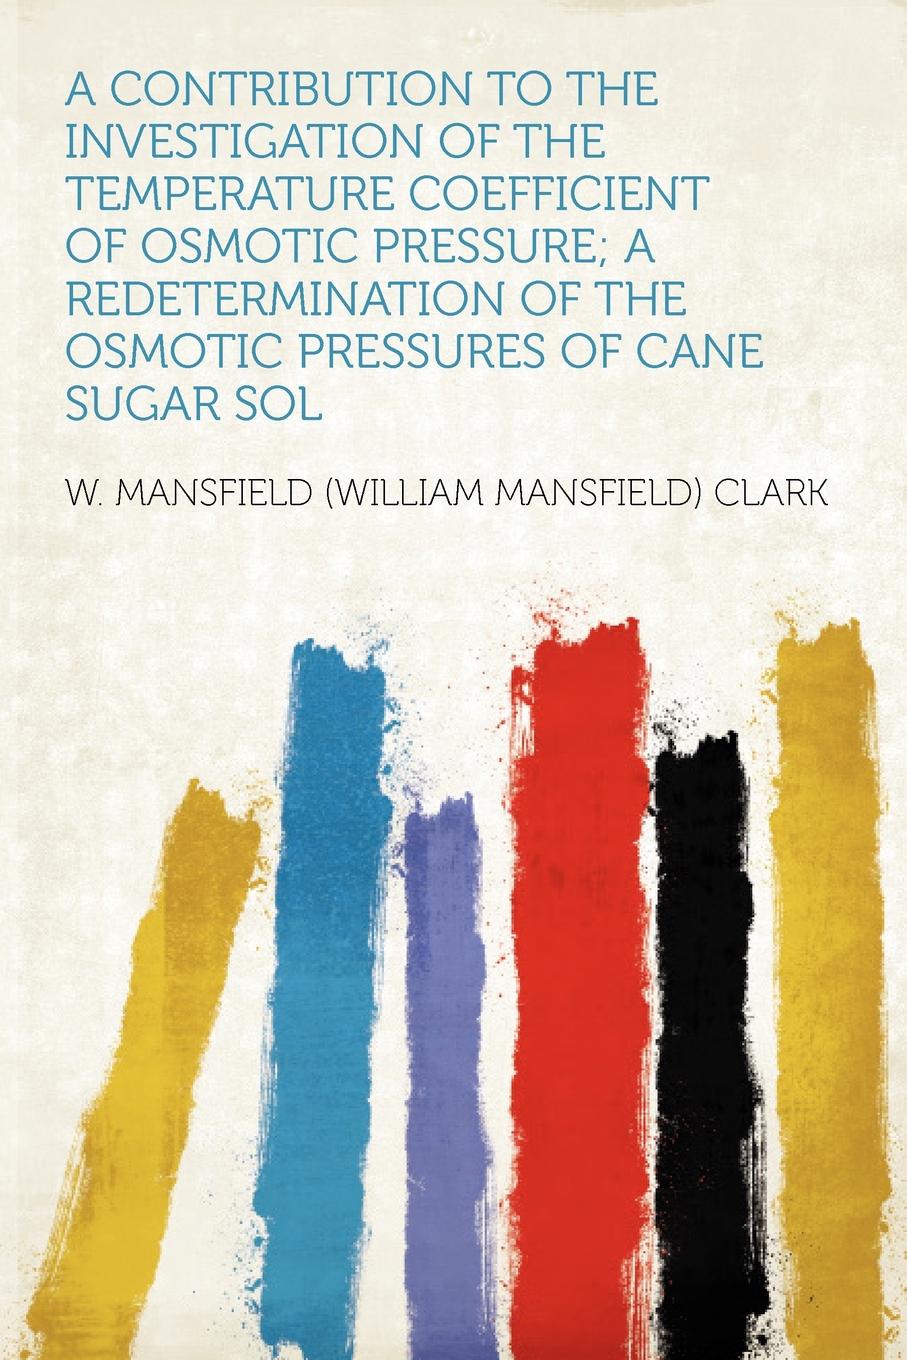 A Contribution to the Investigation of the Temperature Coefficient of Osmotic Pressure; a Redetermination of the Osmotic Pressures of Cane Sugar Sol